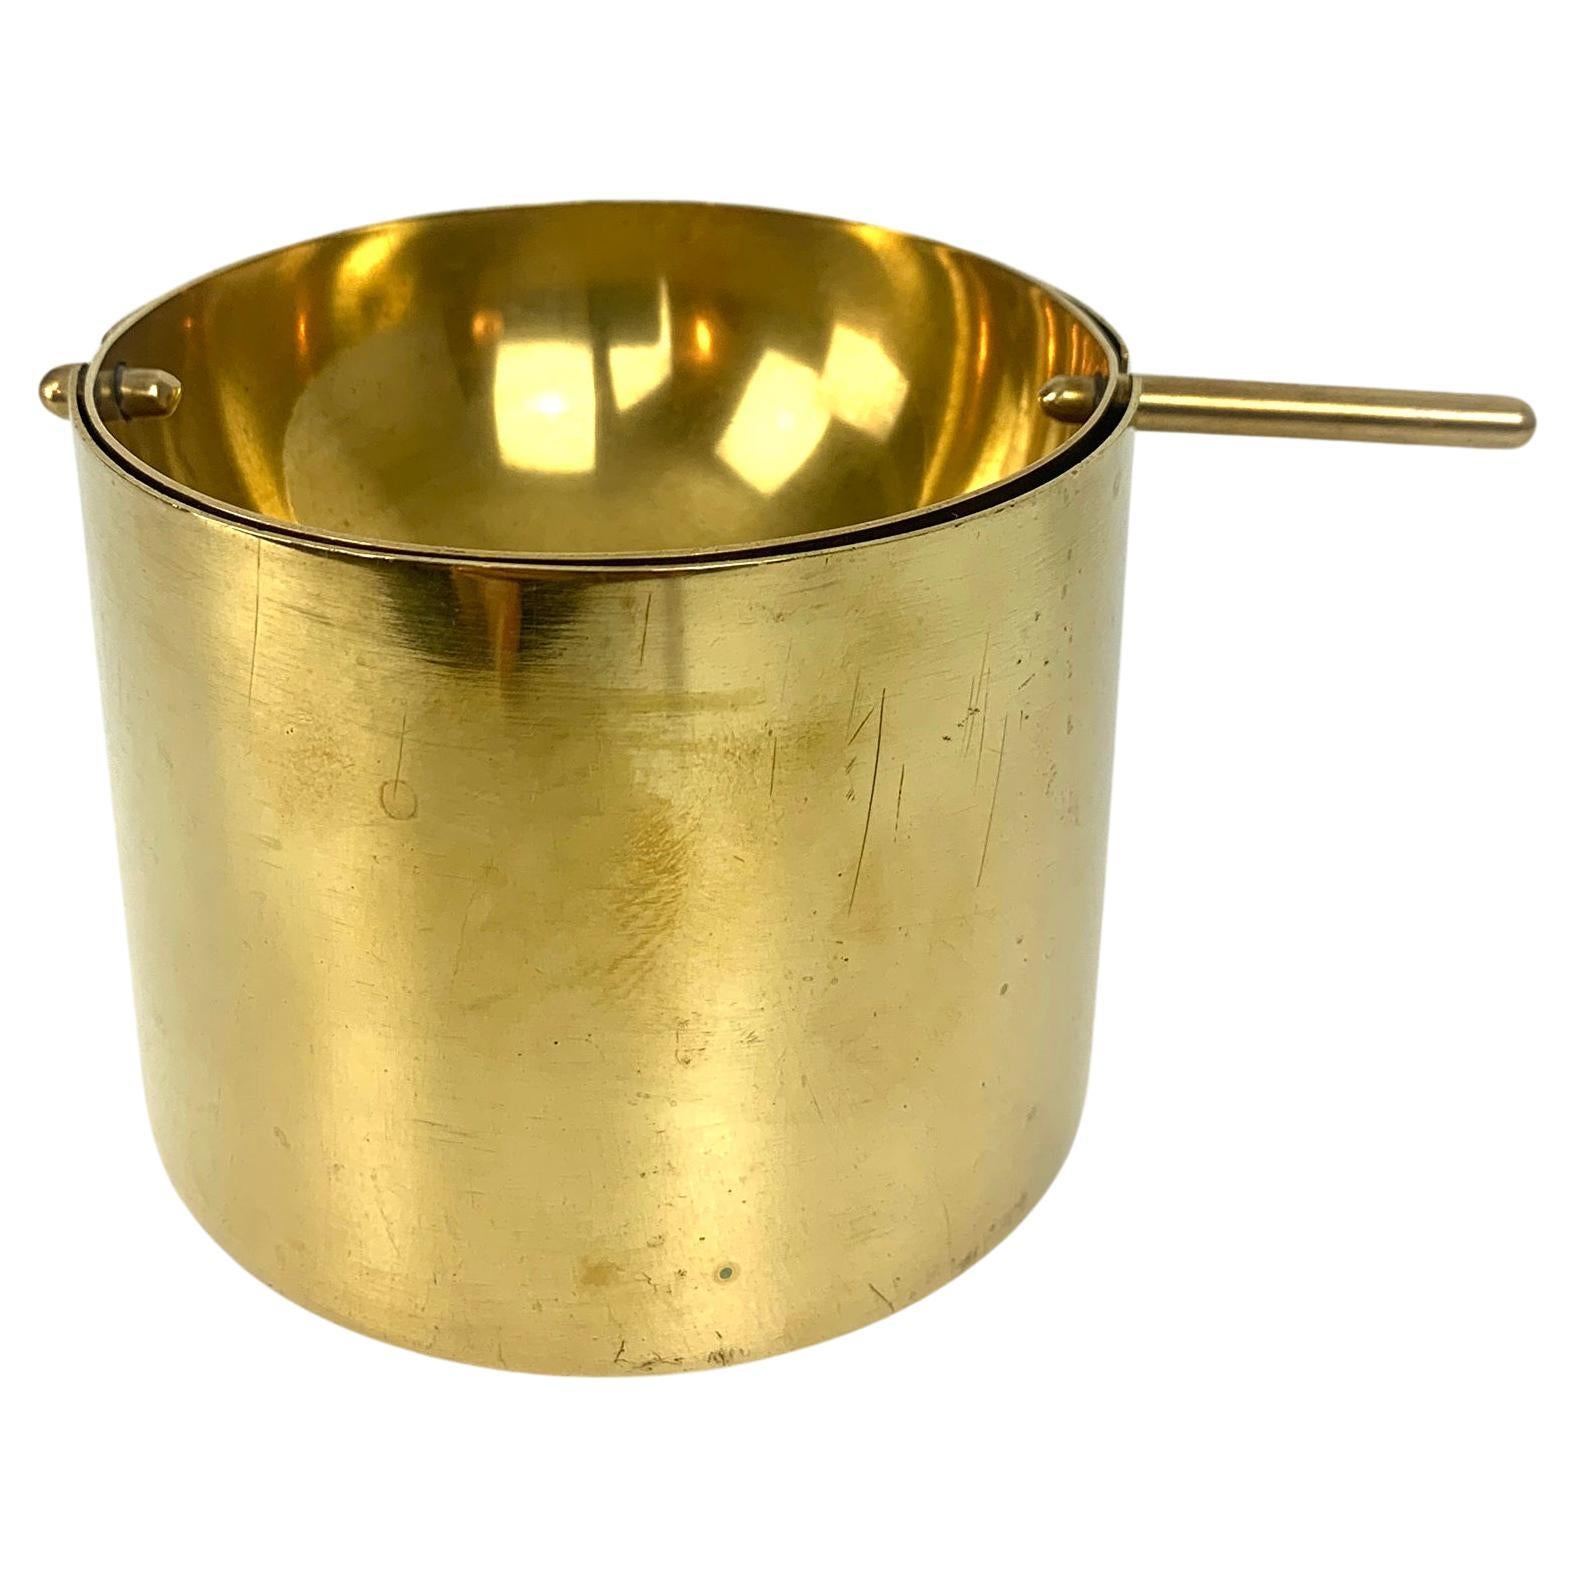 Large Brass Ashtray by Arne Jacobsen for Stelton, Cylinda-Line, 1960s For Sale